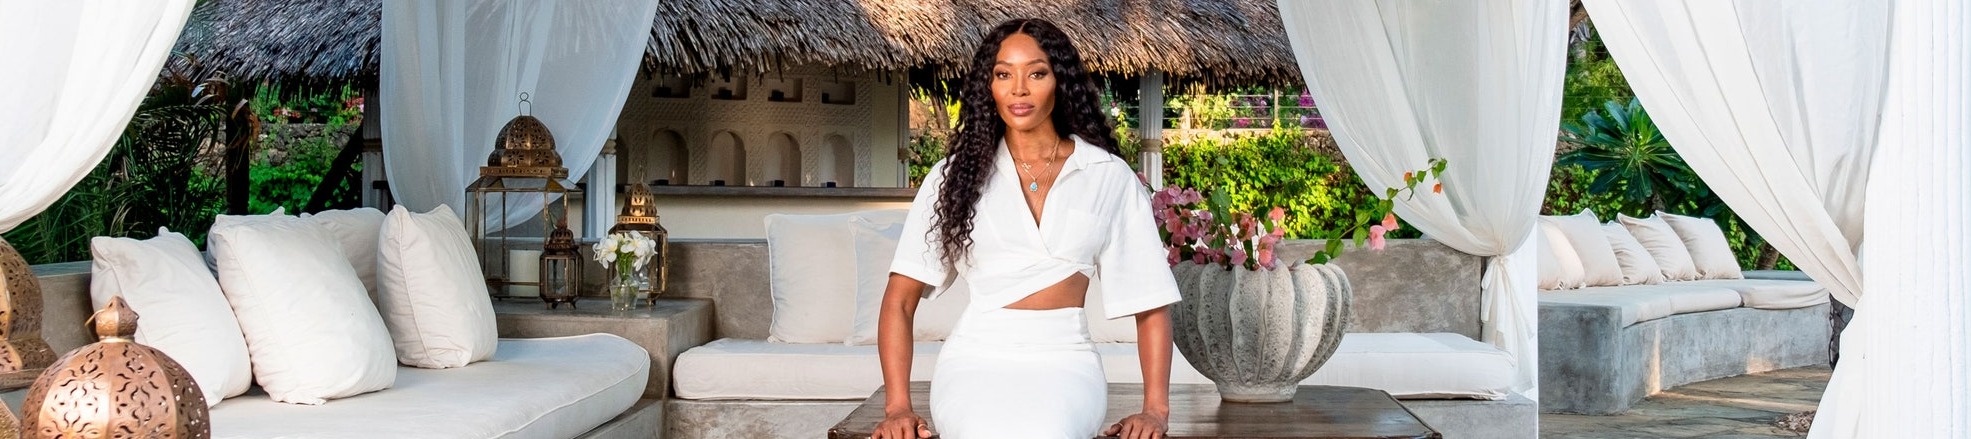 Whenever supermodel Naomi Campbell needs to unplug, she heads to her luxurious, airy villa in Malindi, Kenya